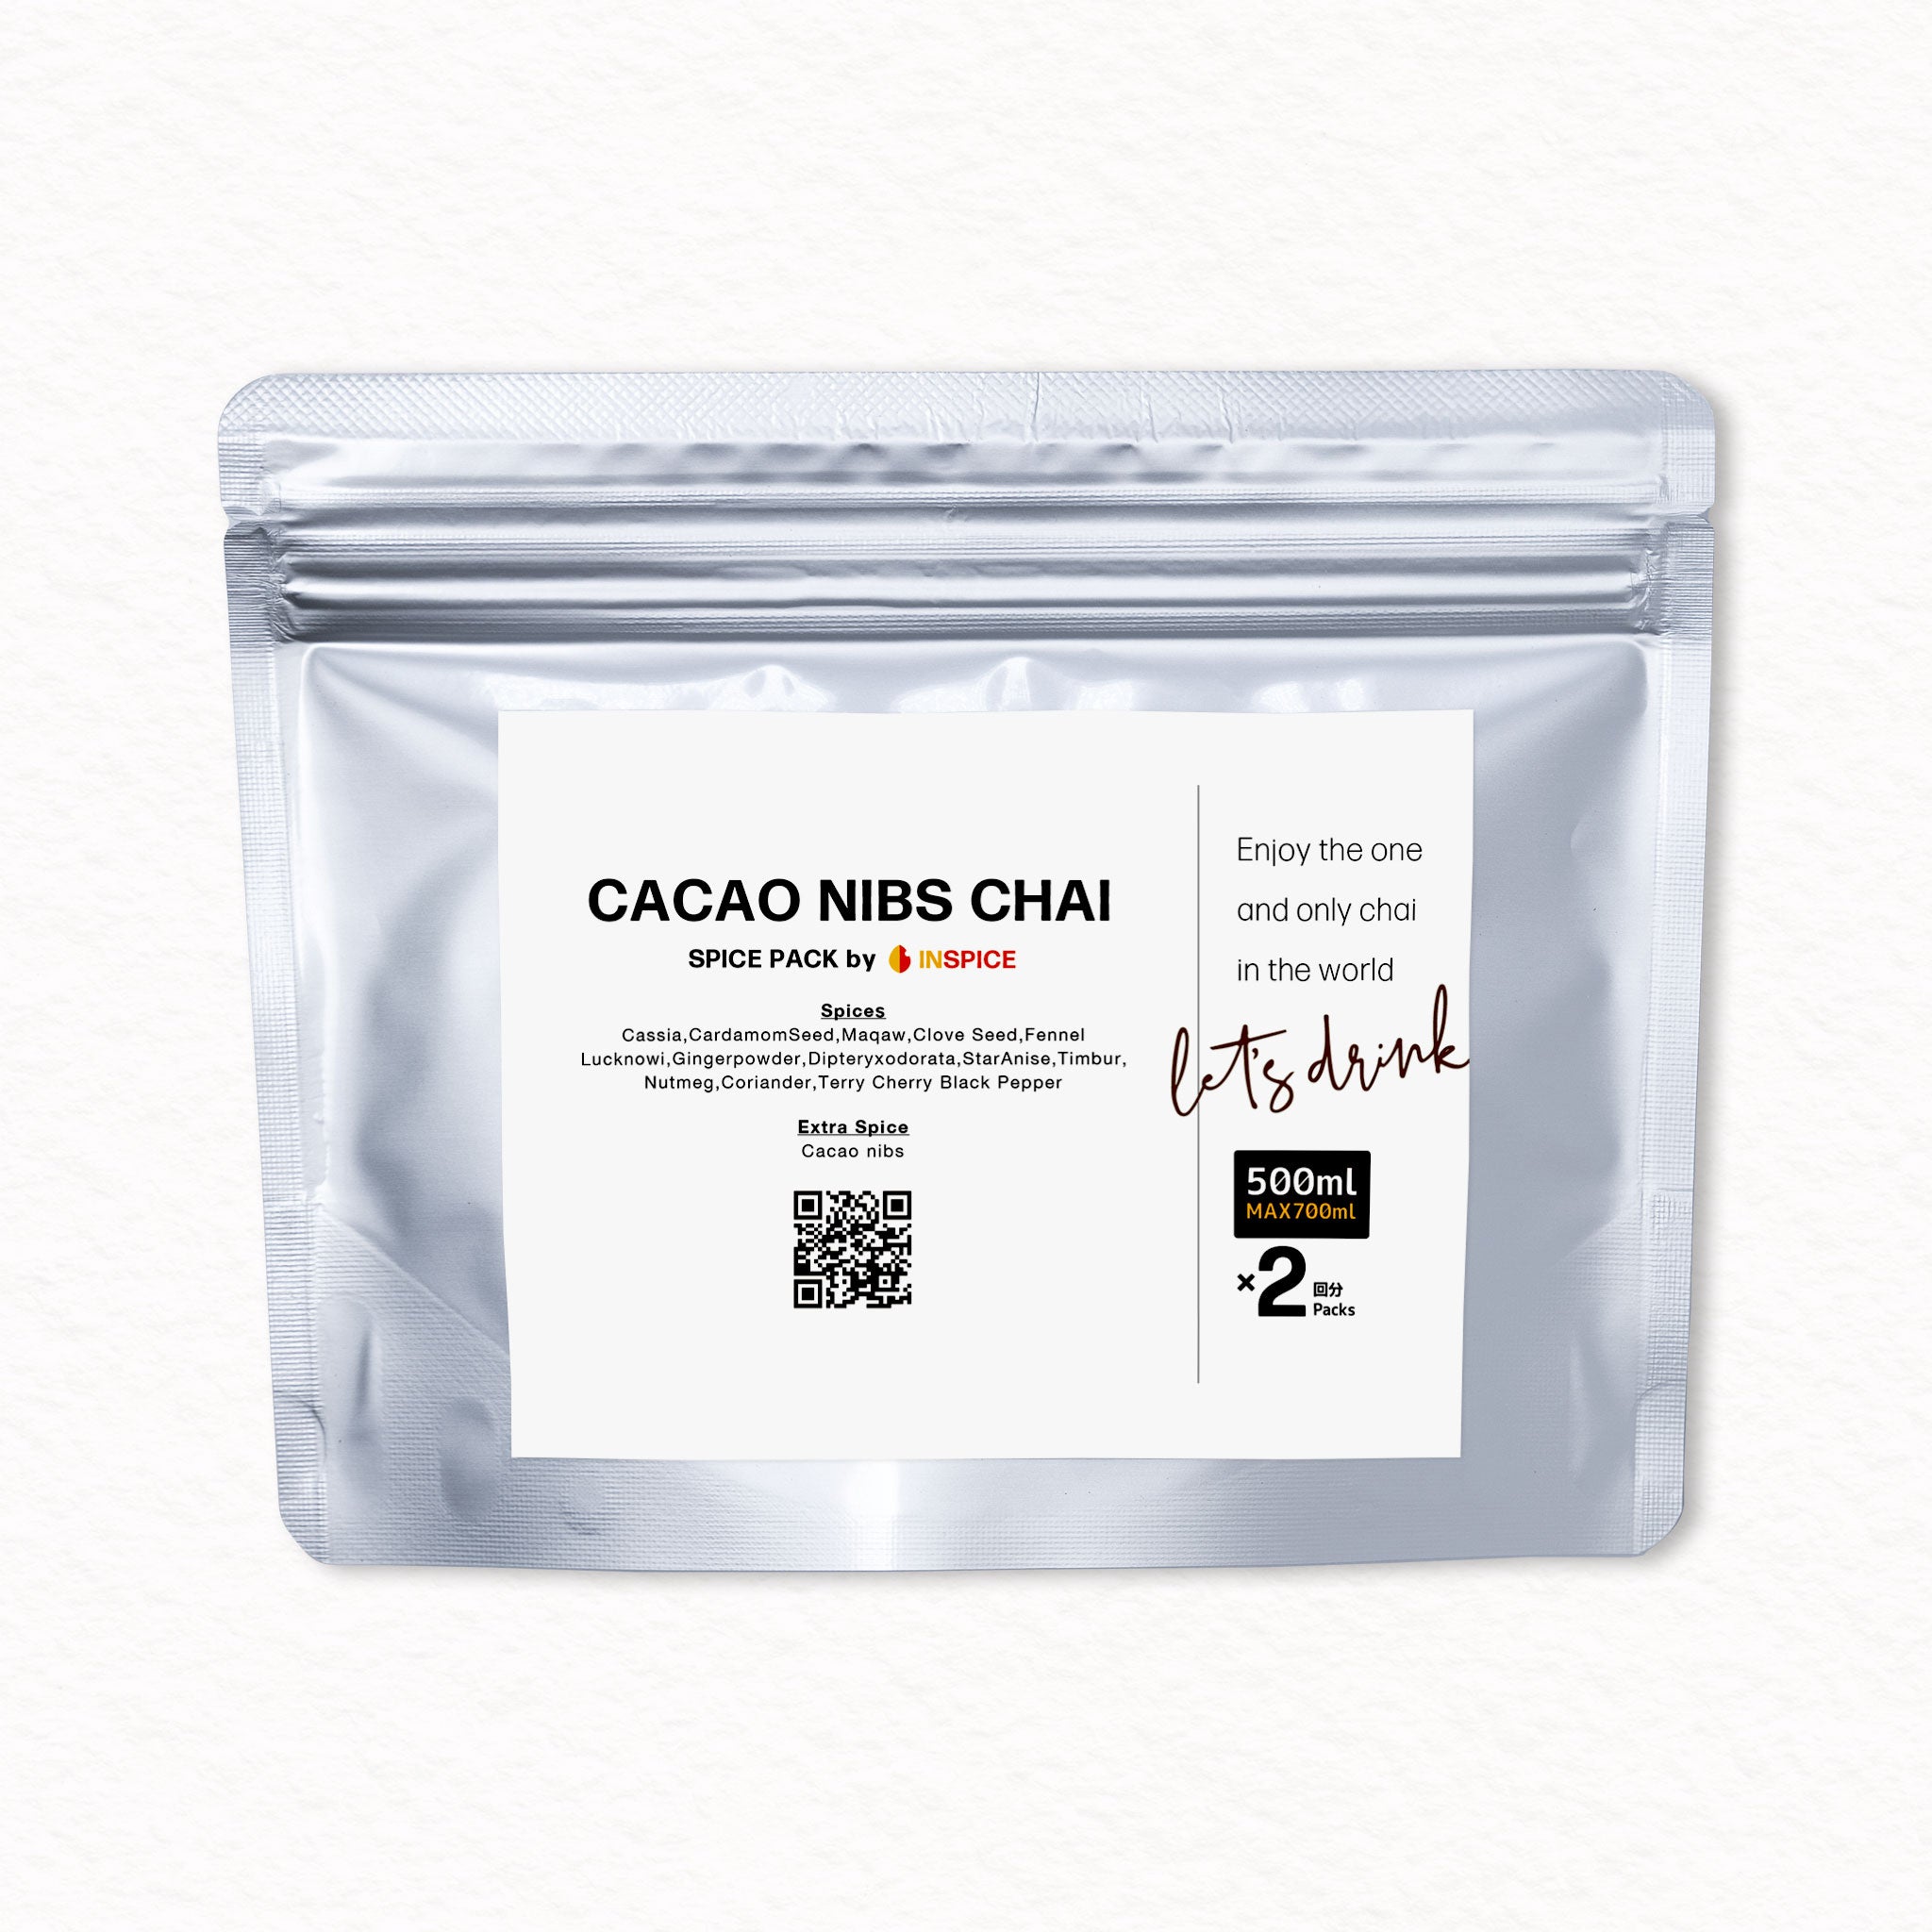 INSPICE CACAO NIBS CHAI SPICE PACK「カカオニブチャイ スパイス